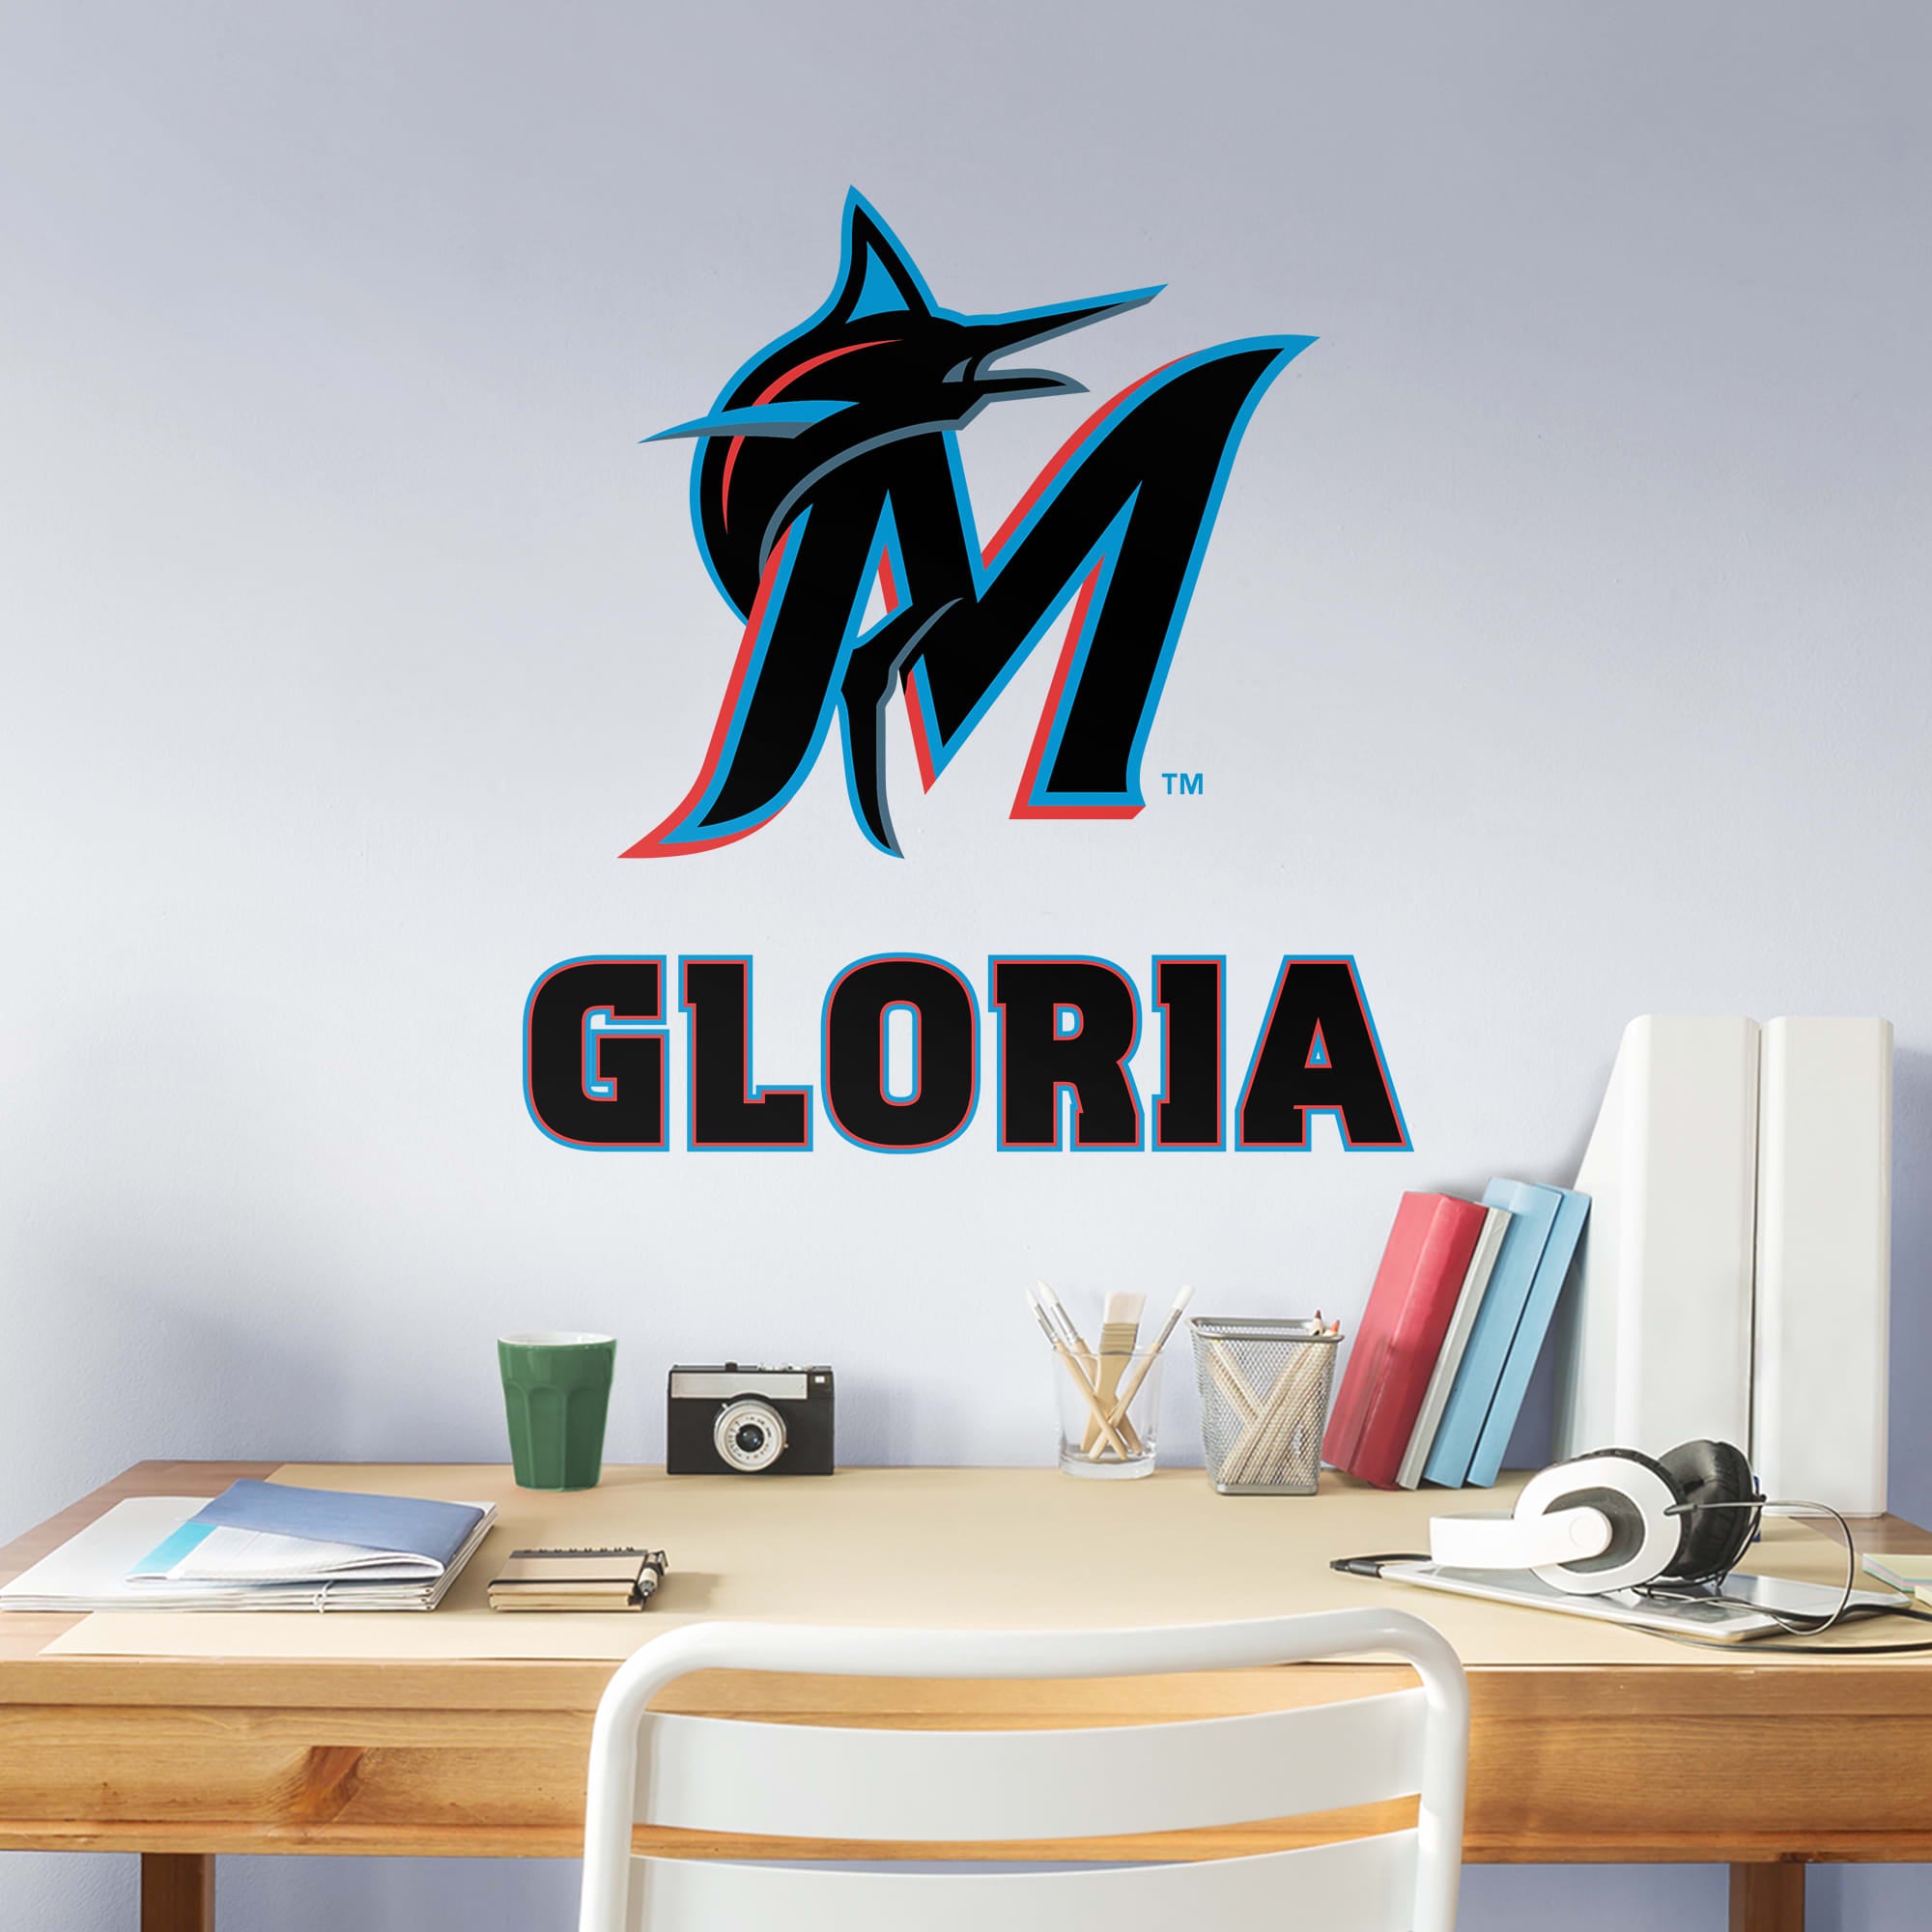 Miami Marlins: Stacked Personalized Name - Officially Licensed MLB Transfer Decal in Black (52"W x 39.5"H) by Fathead | Vinyl